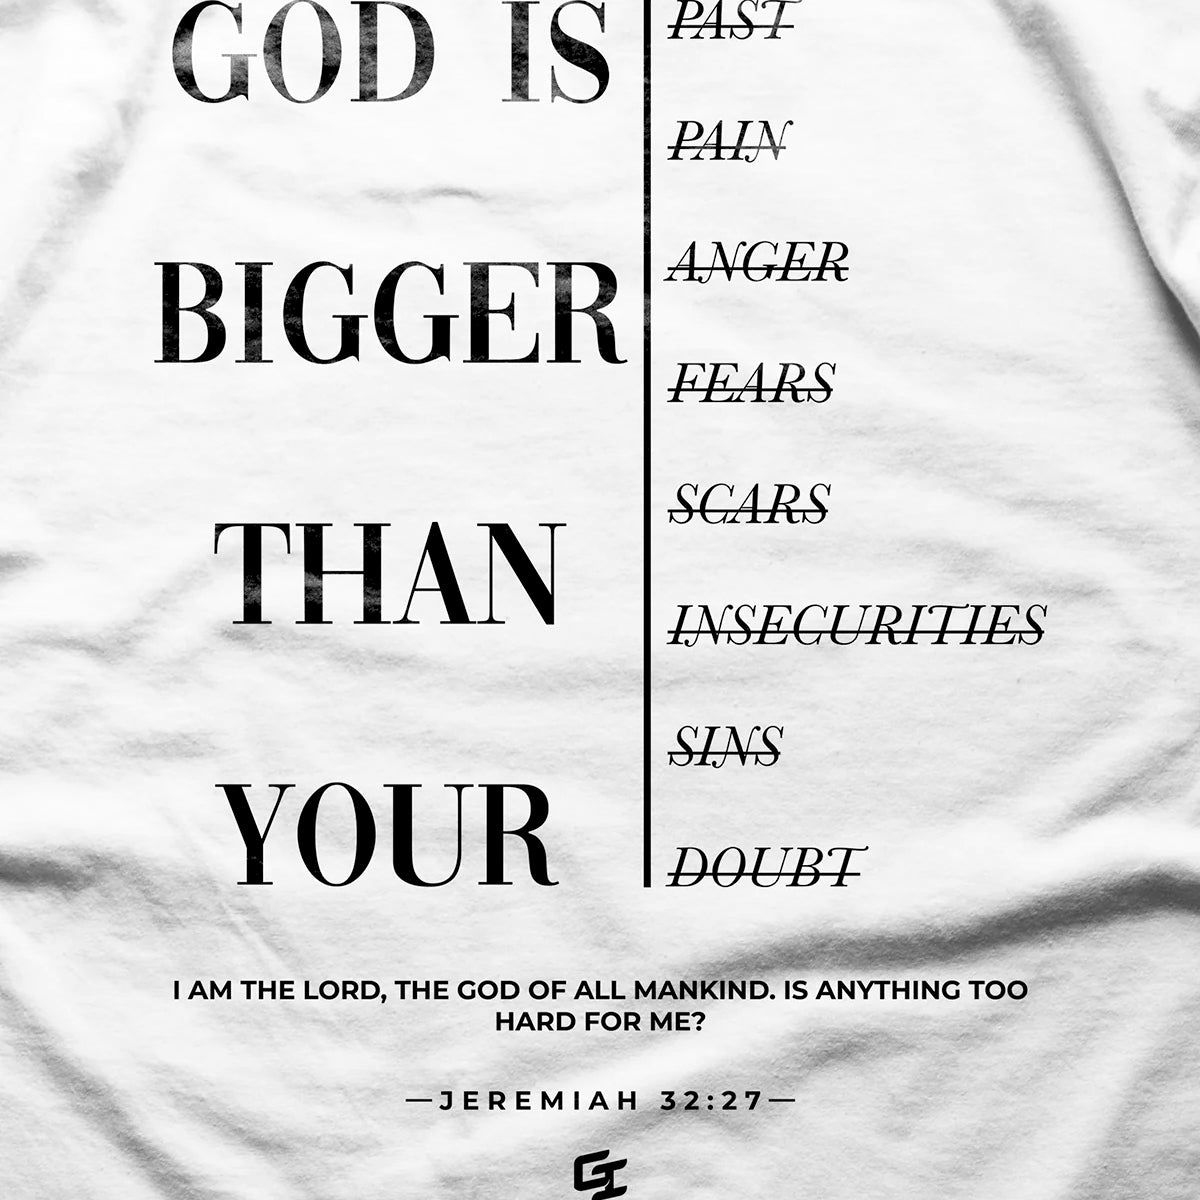 Epiphany 'God Is Bigger Than Your...' Lightweight T-Shirt